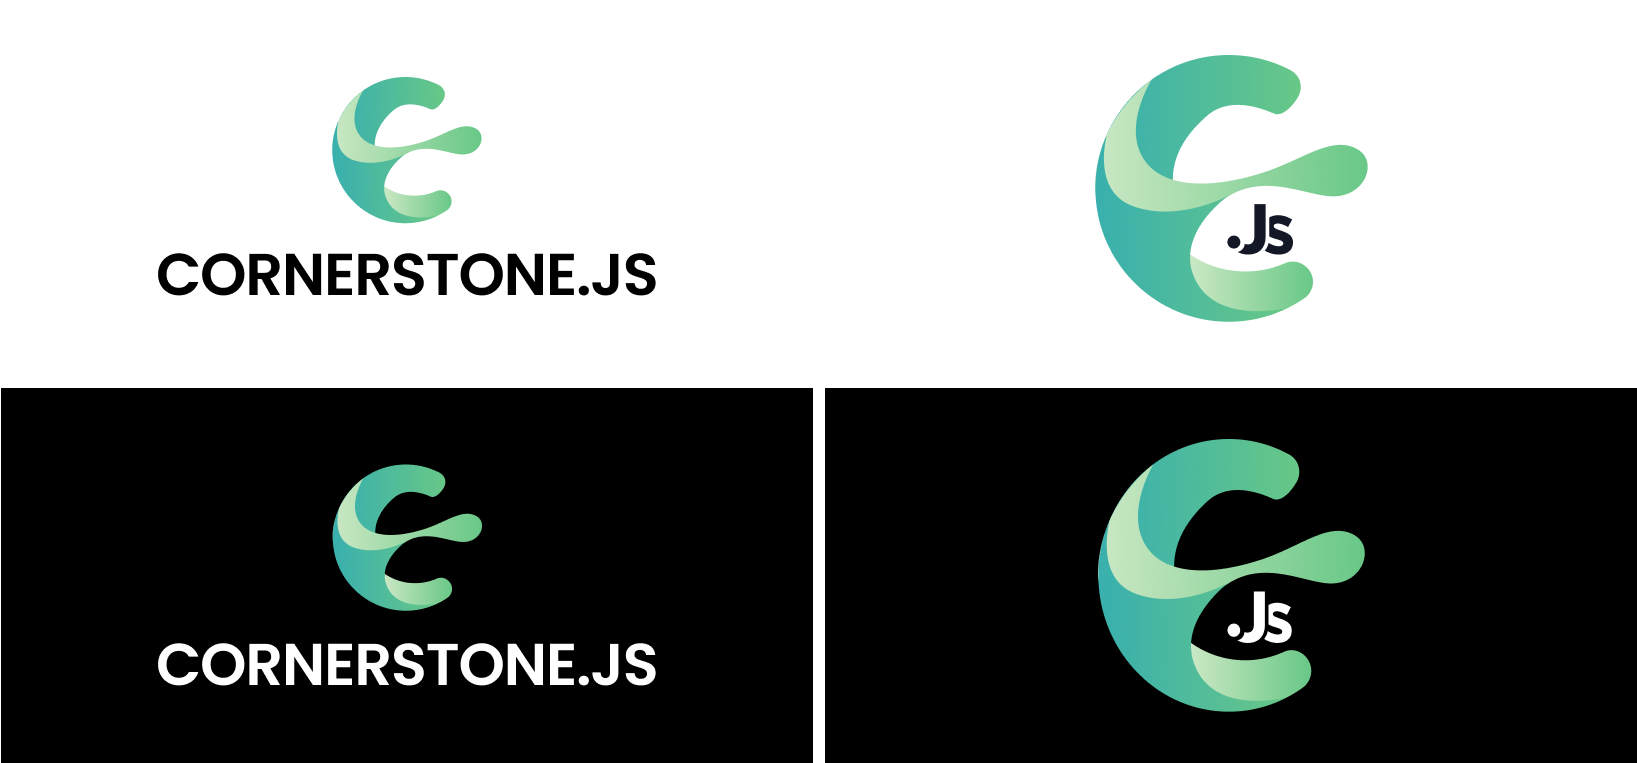 Grid of our new logo with different background colors